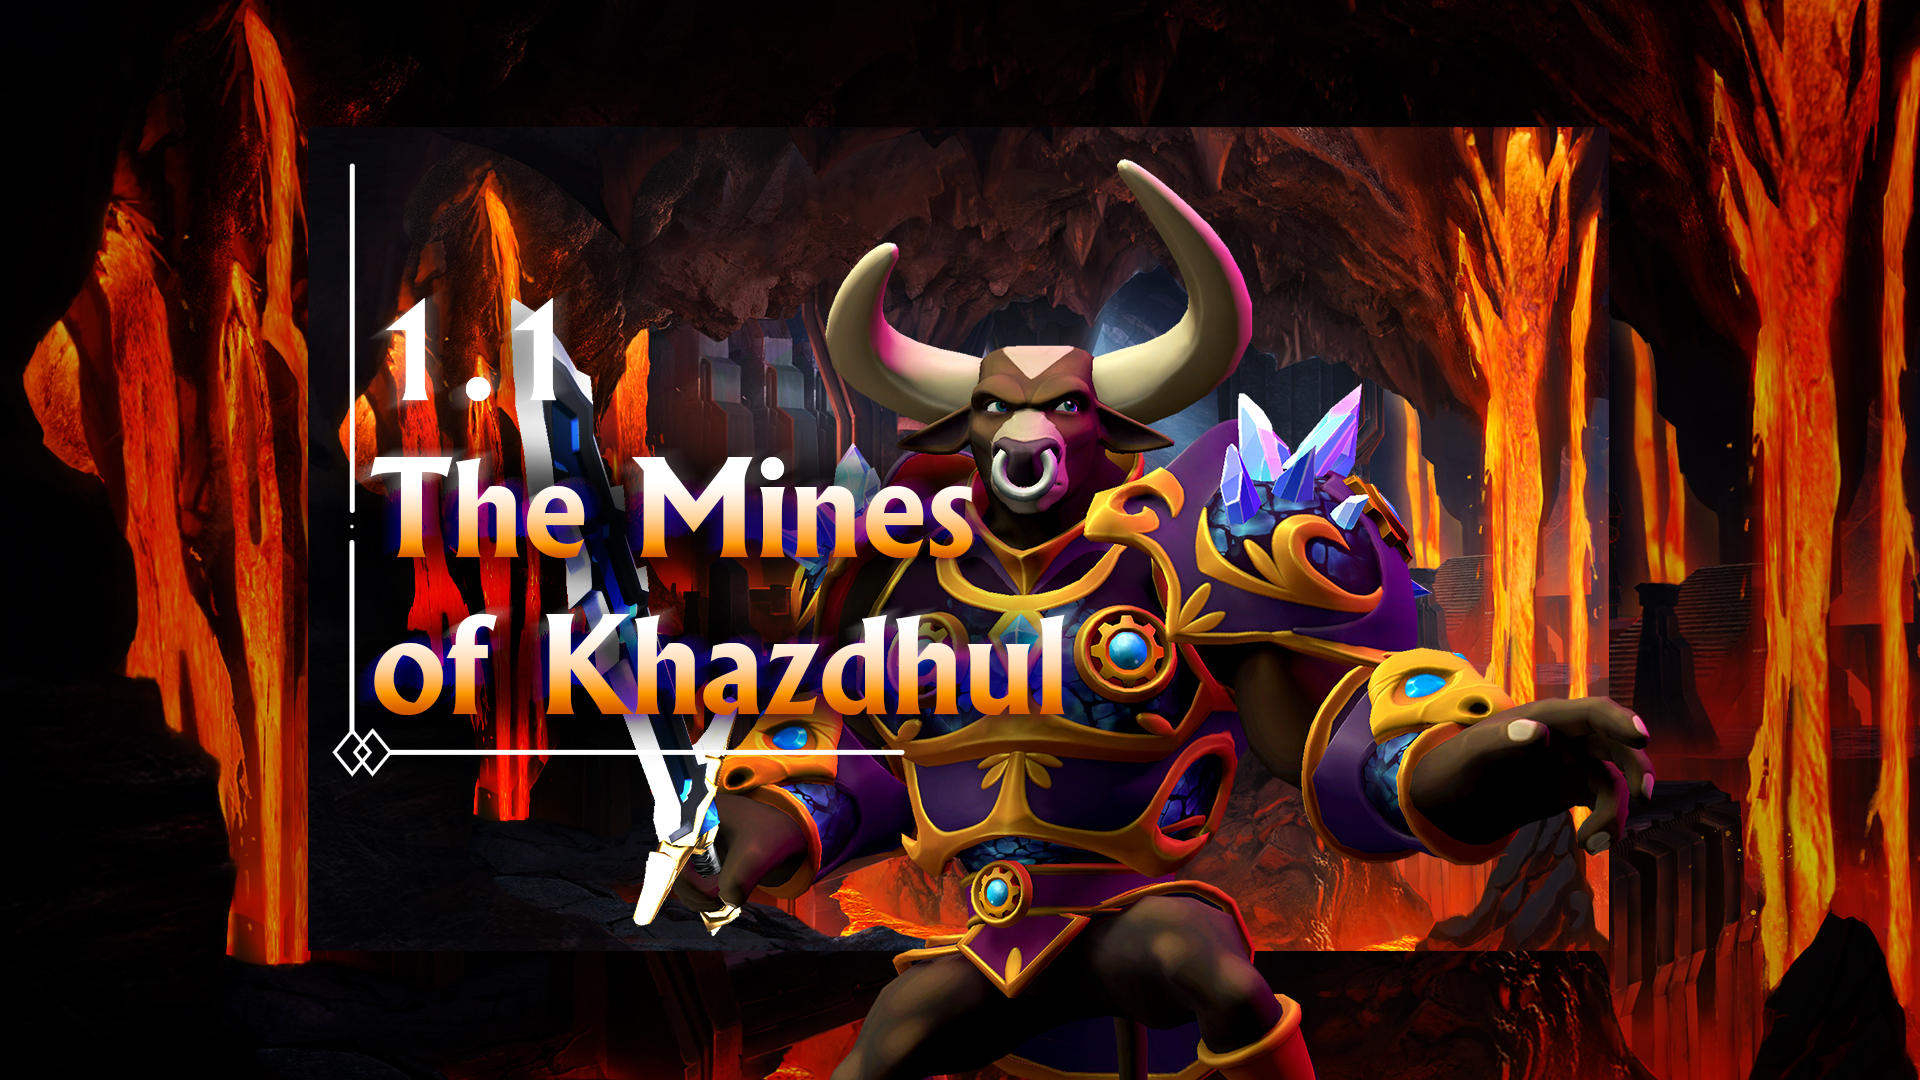 Update 1.1 – The Mines of Khazdhul – Patch Notes